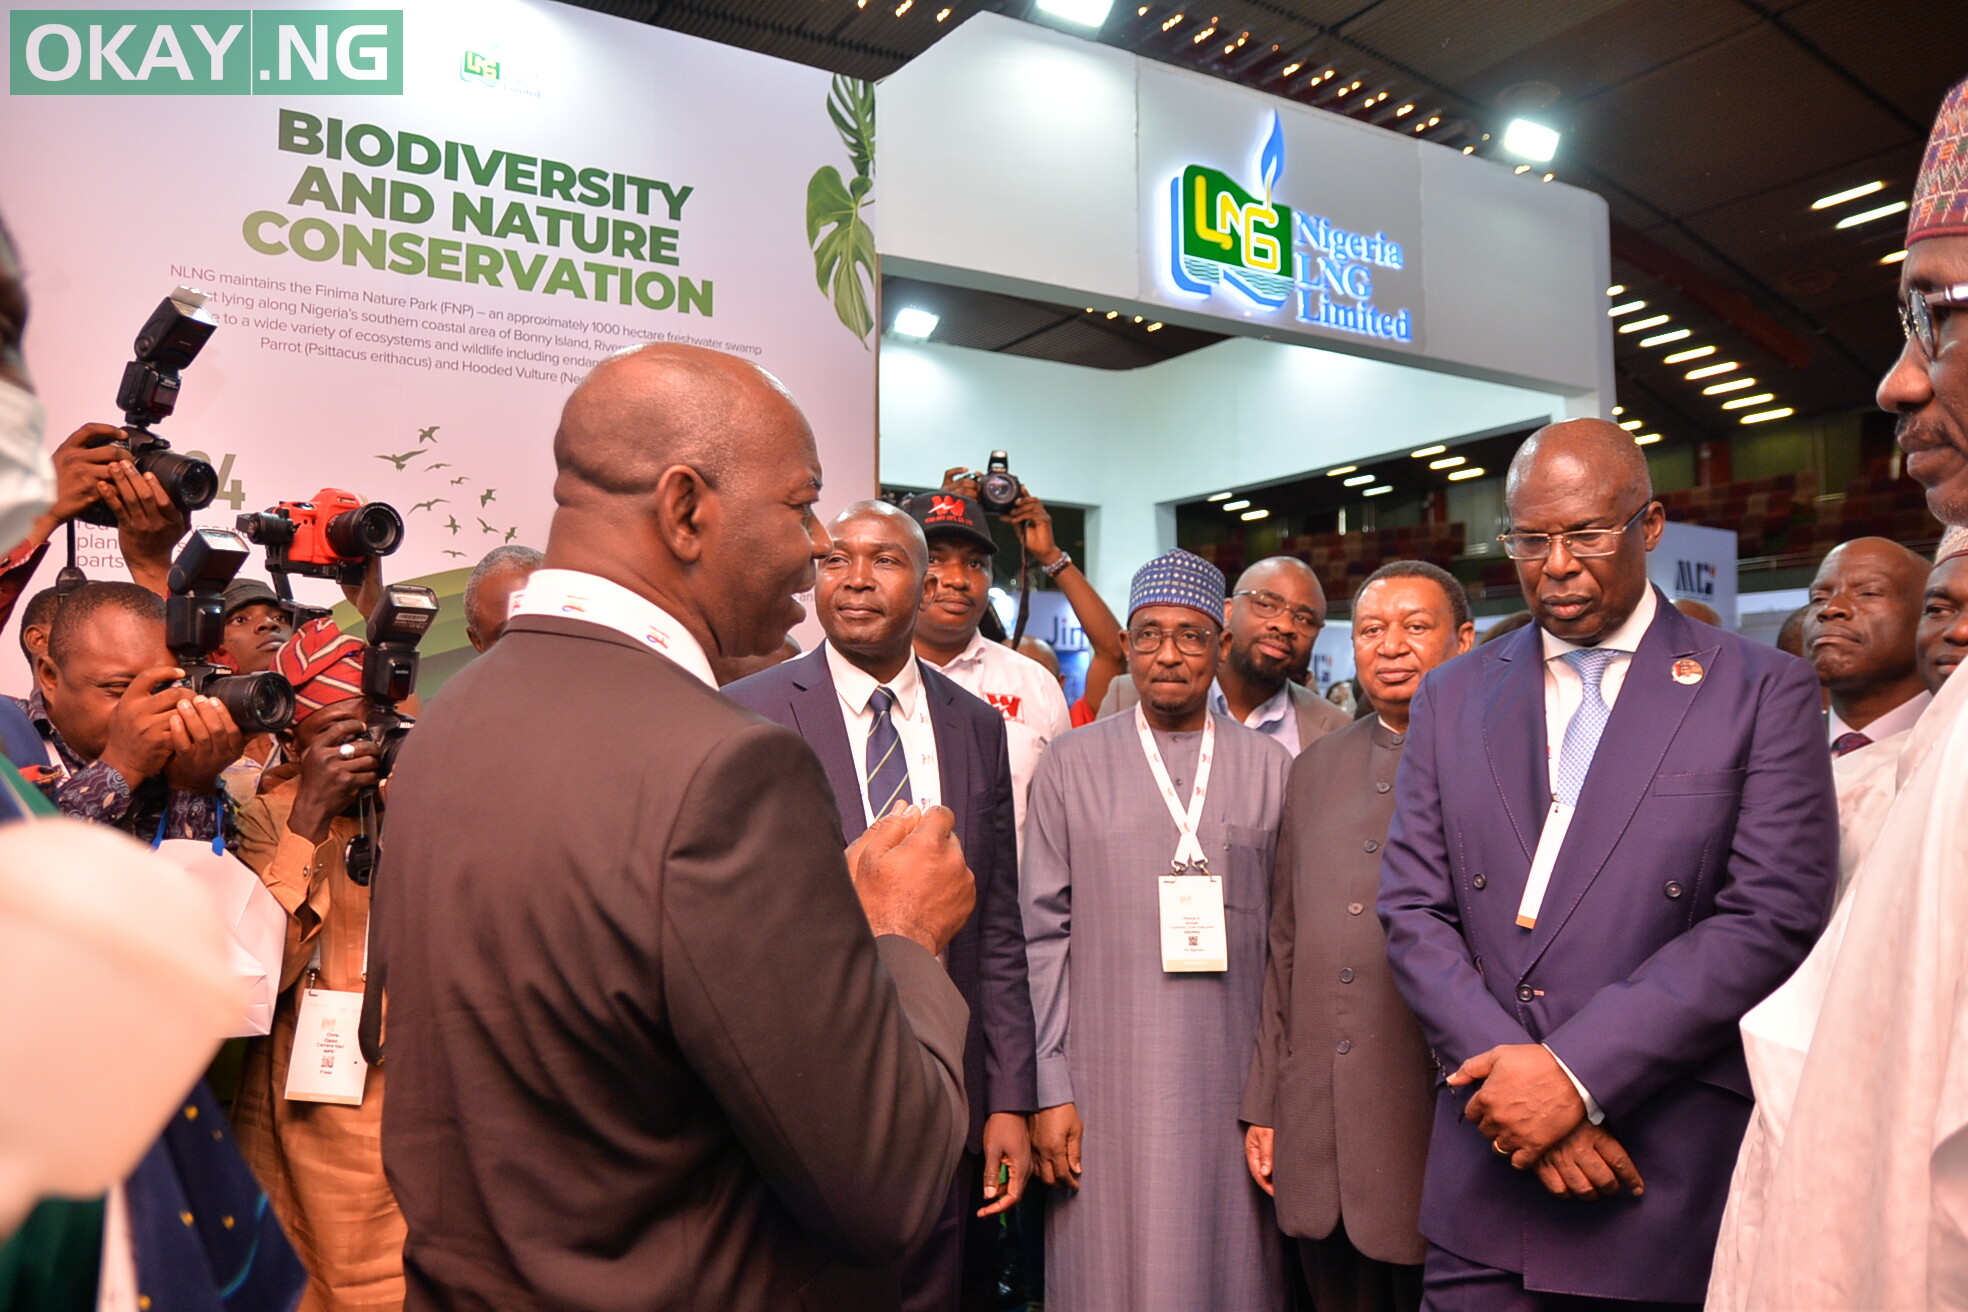 NLNG Manager, Government Relations, Godson Dienye and NLNG’s MD/CEO, Dr. Philip Mshelbila, brief the Minister of State for Petroleum Resources, Chief Timipre Sylva; Secretary-General of OPEC, Mohammed Barkindo; and NNPC’s GMD, Mele Kyari at NLNG’s Exhibition stand, Nigeria Oil & Gas Conference (NOG) 2022 today.